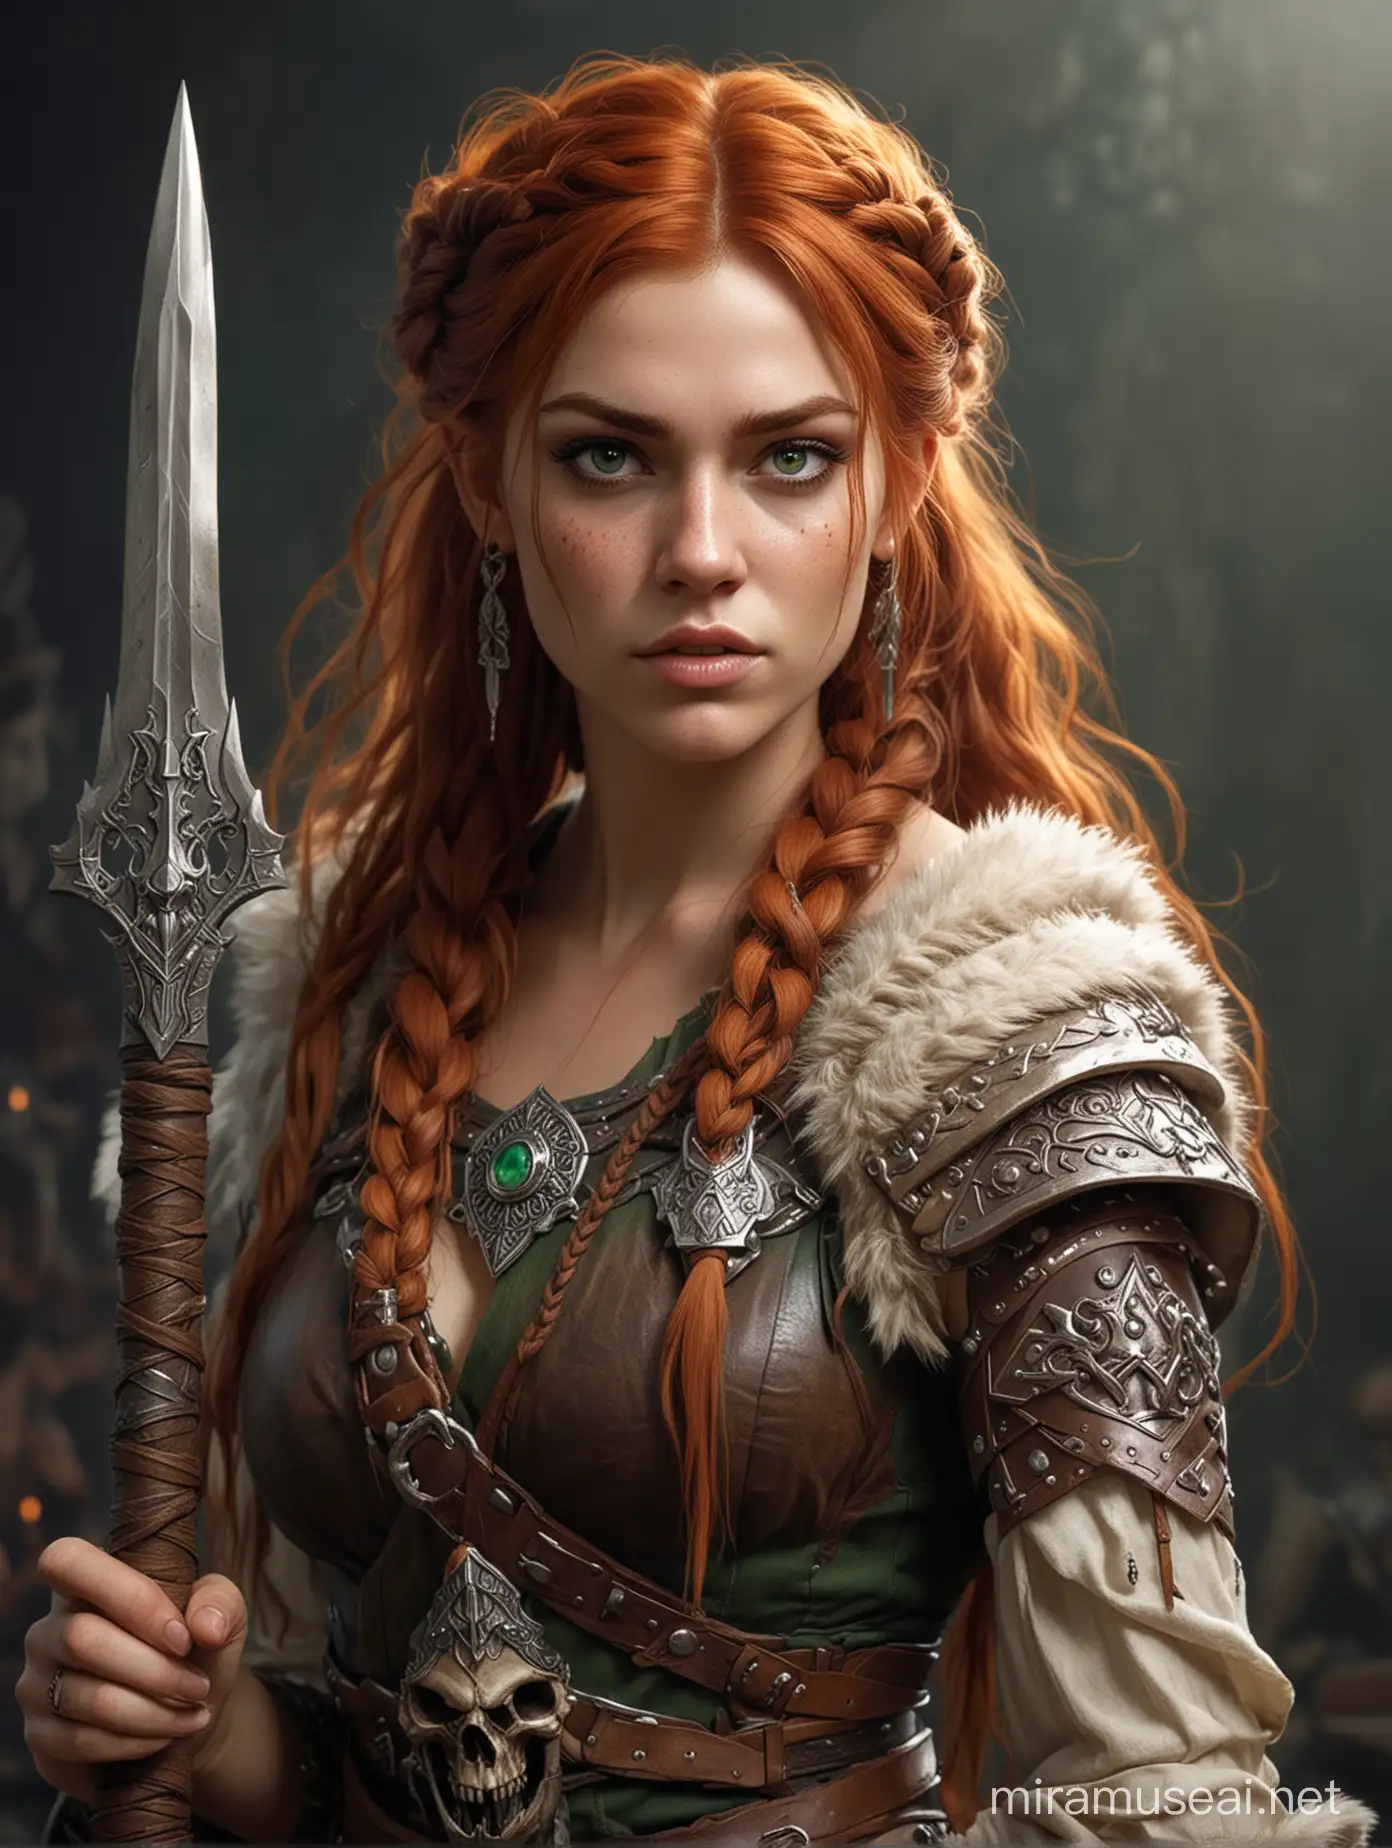 I want you to create the image of a Dungeons and Dragons character, a human woman. She is a barbarian, redhead, with braided hair and green eyes. Dresses in animal skins and bones decoration.